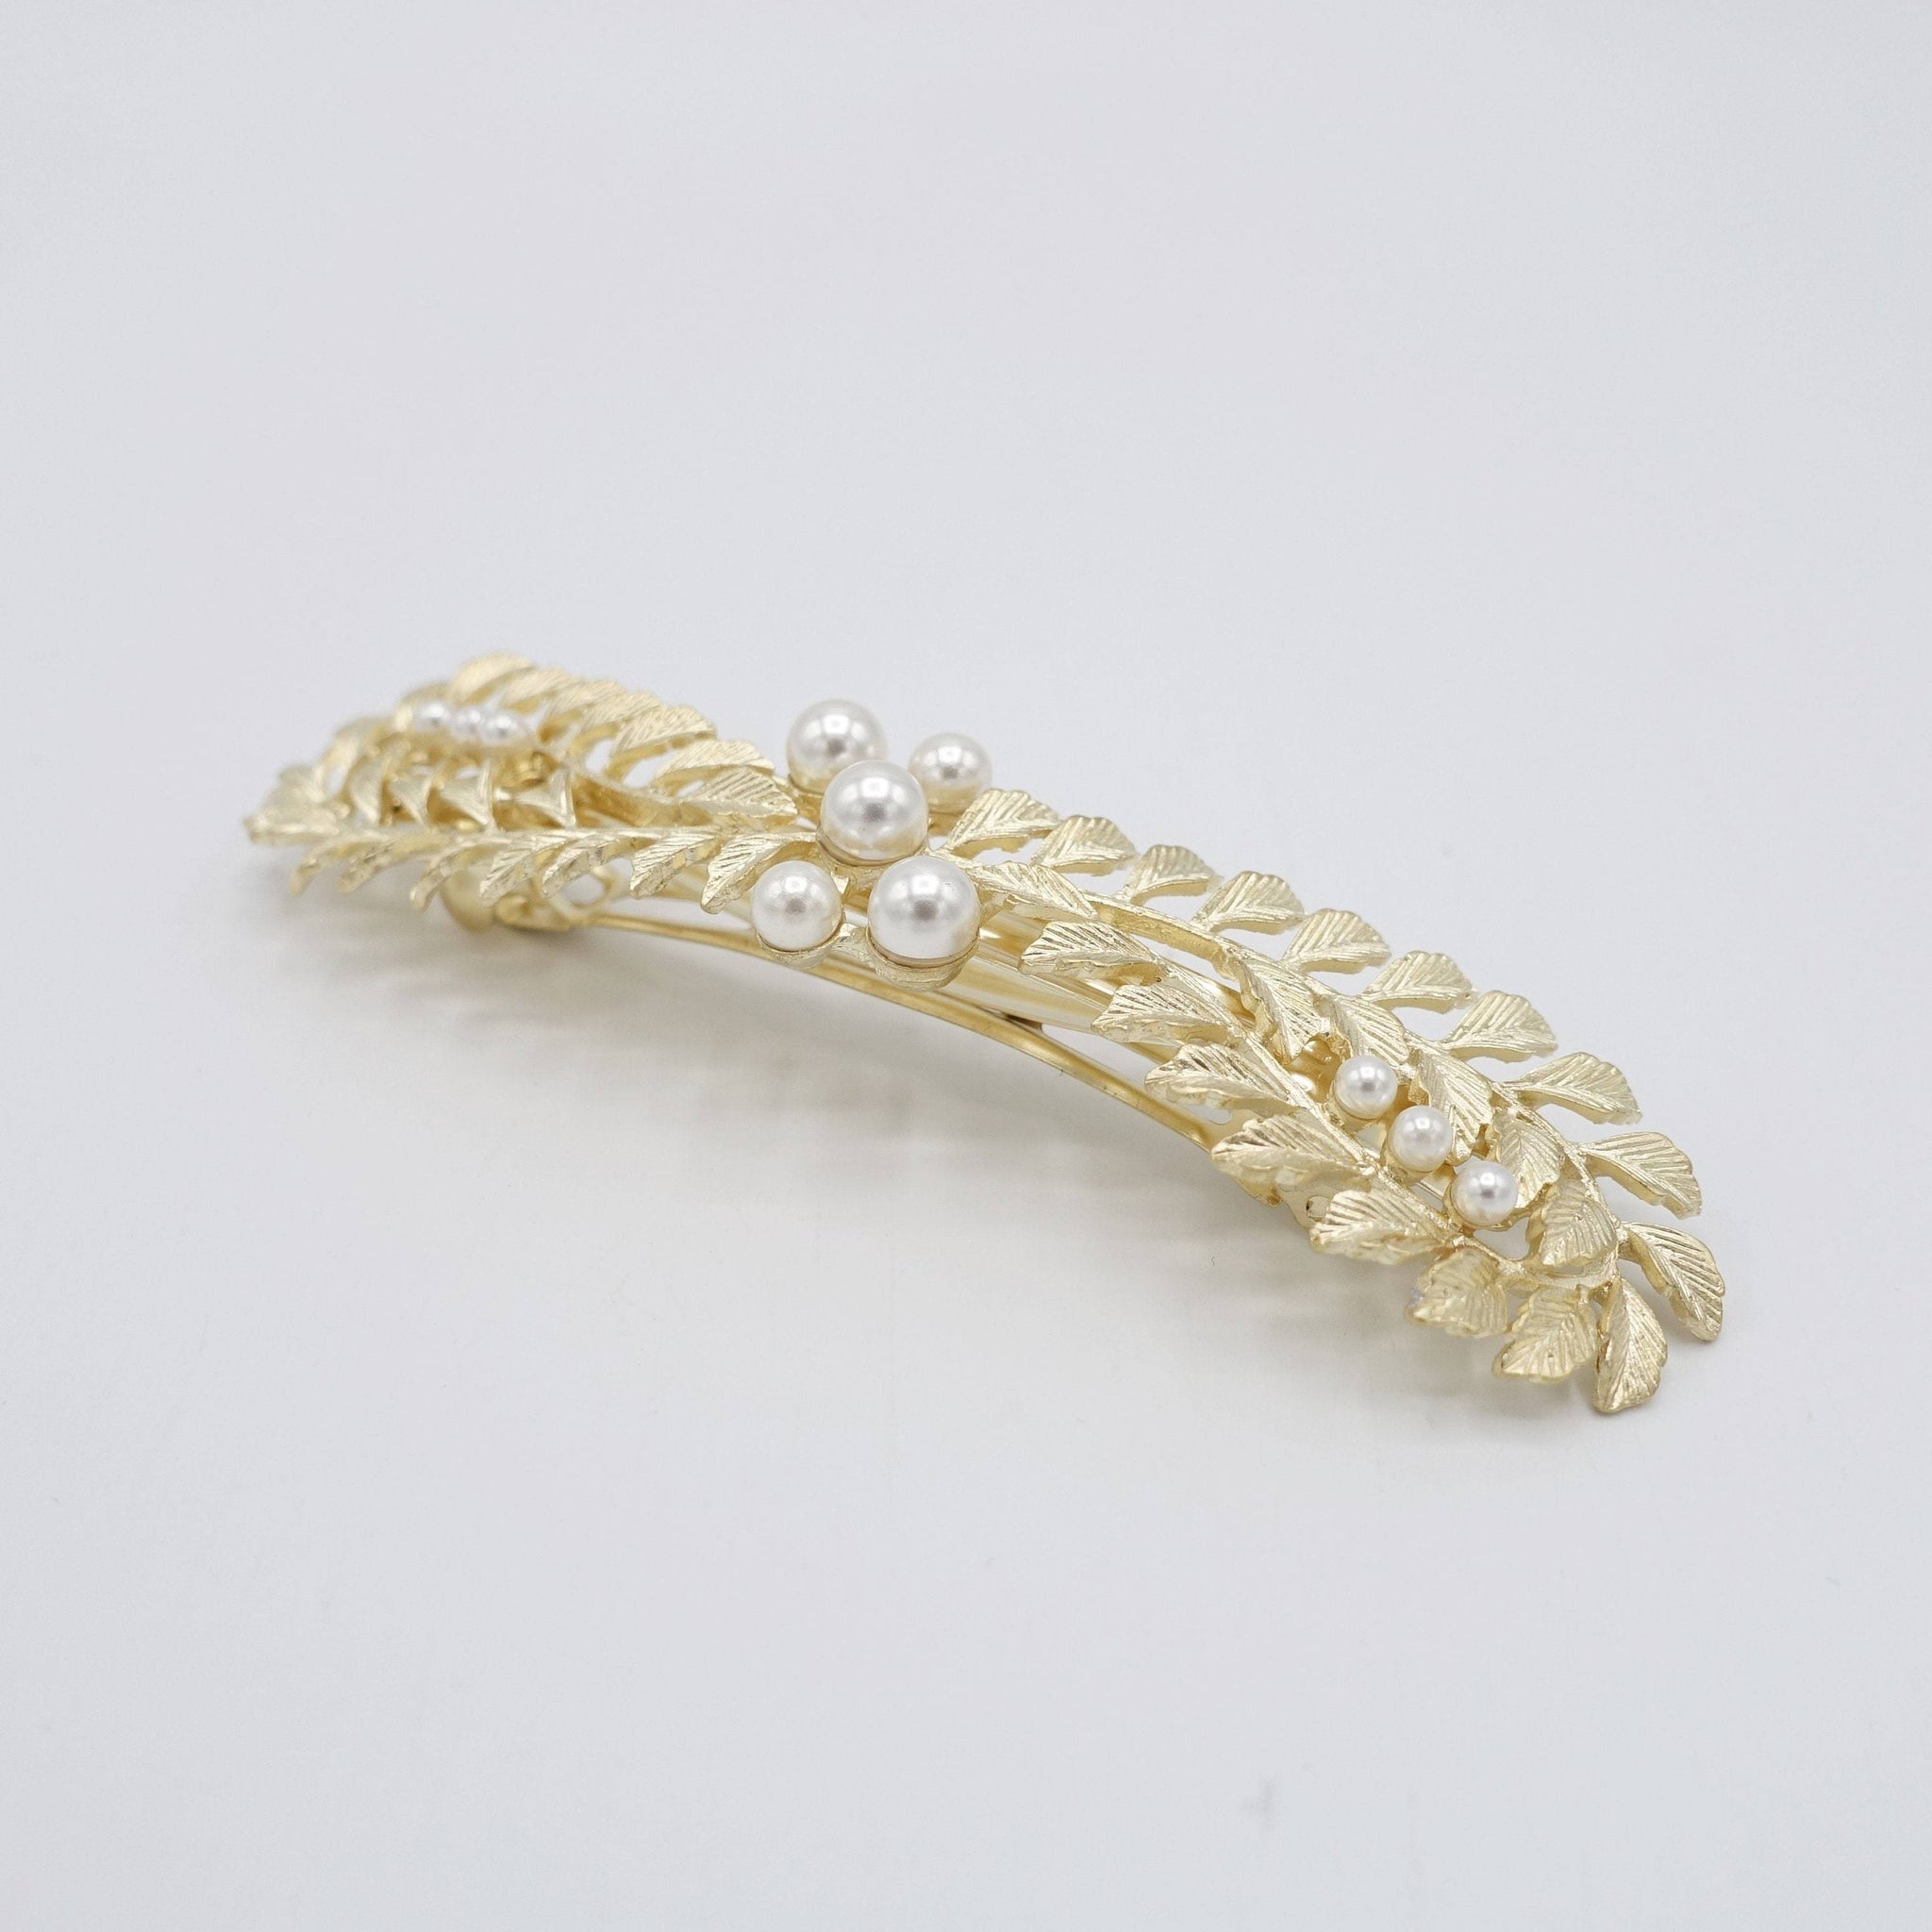 VeryShine claw/banana/barrette leaves hair barrette pearl decorated hair accessory for women